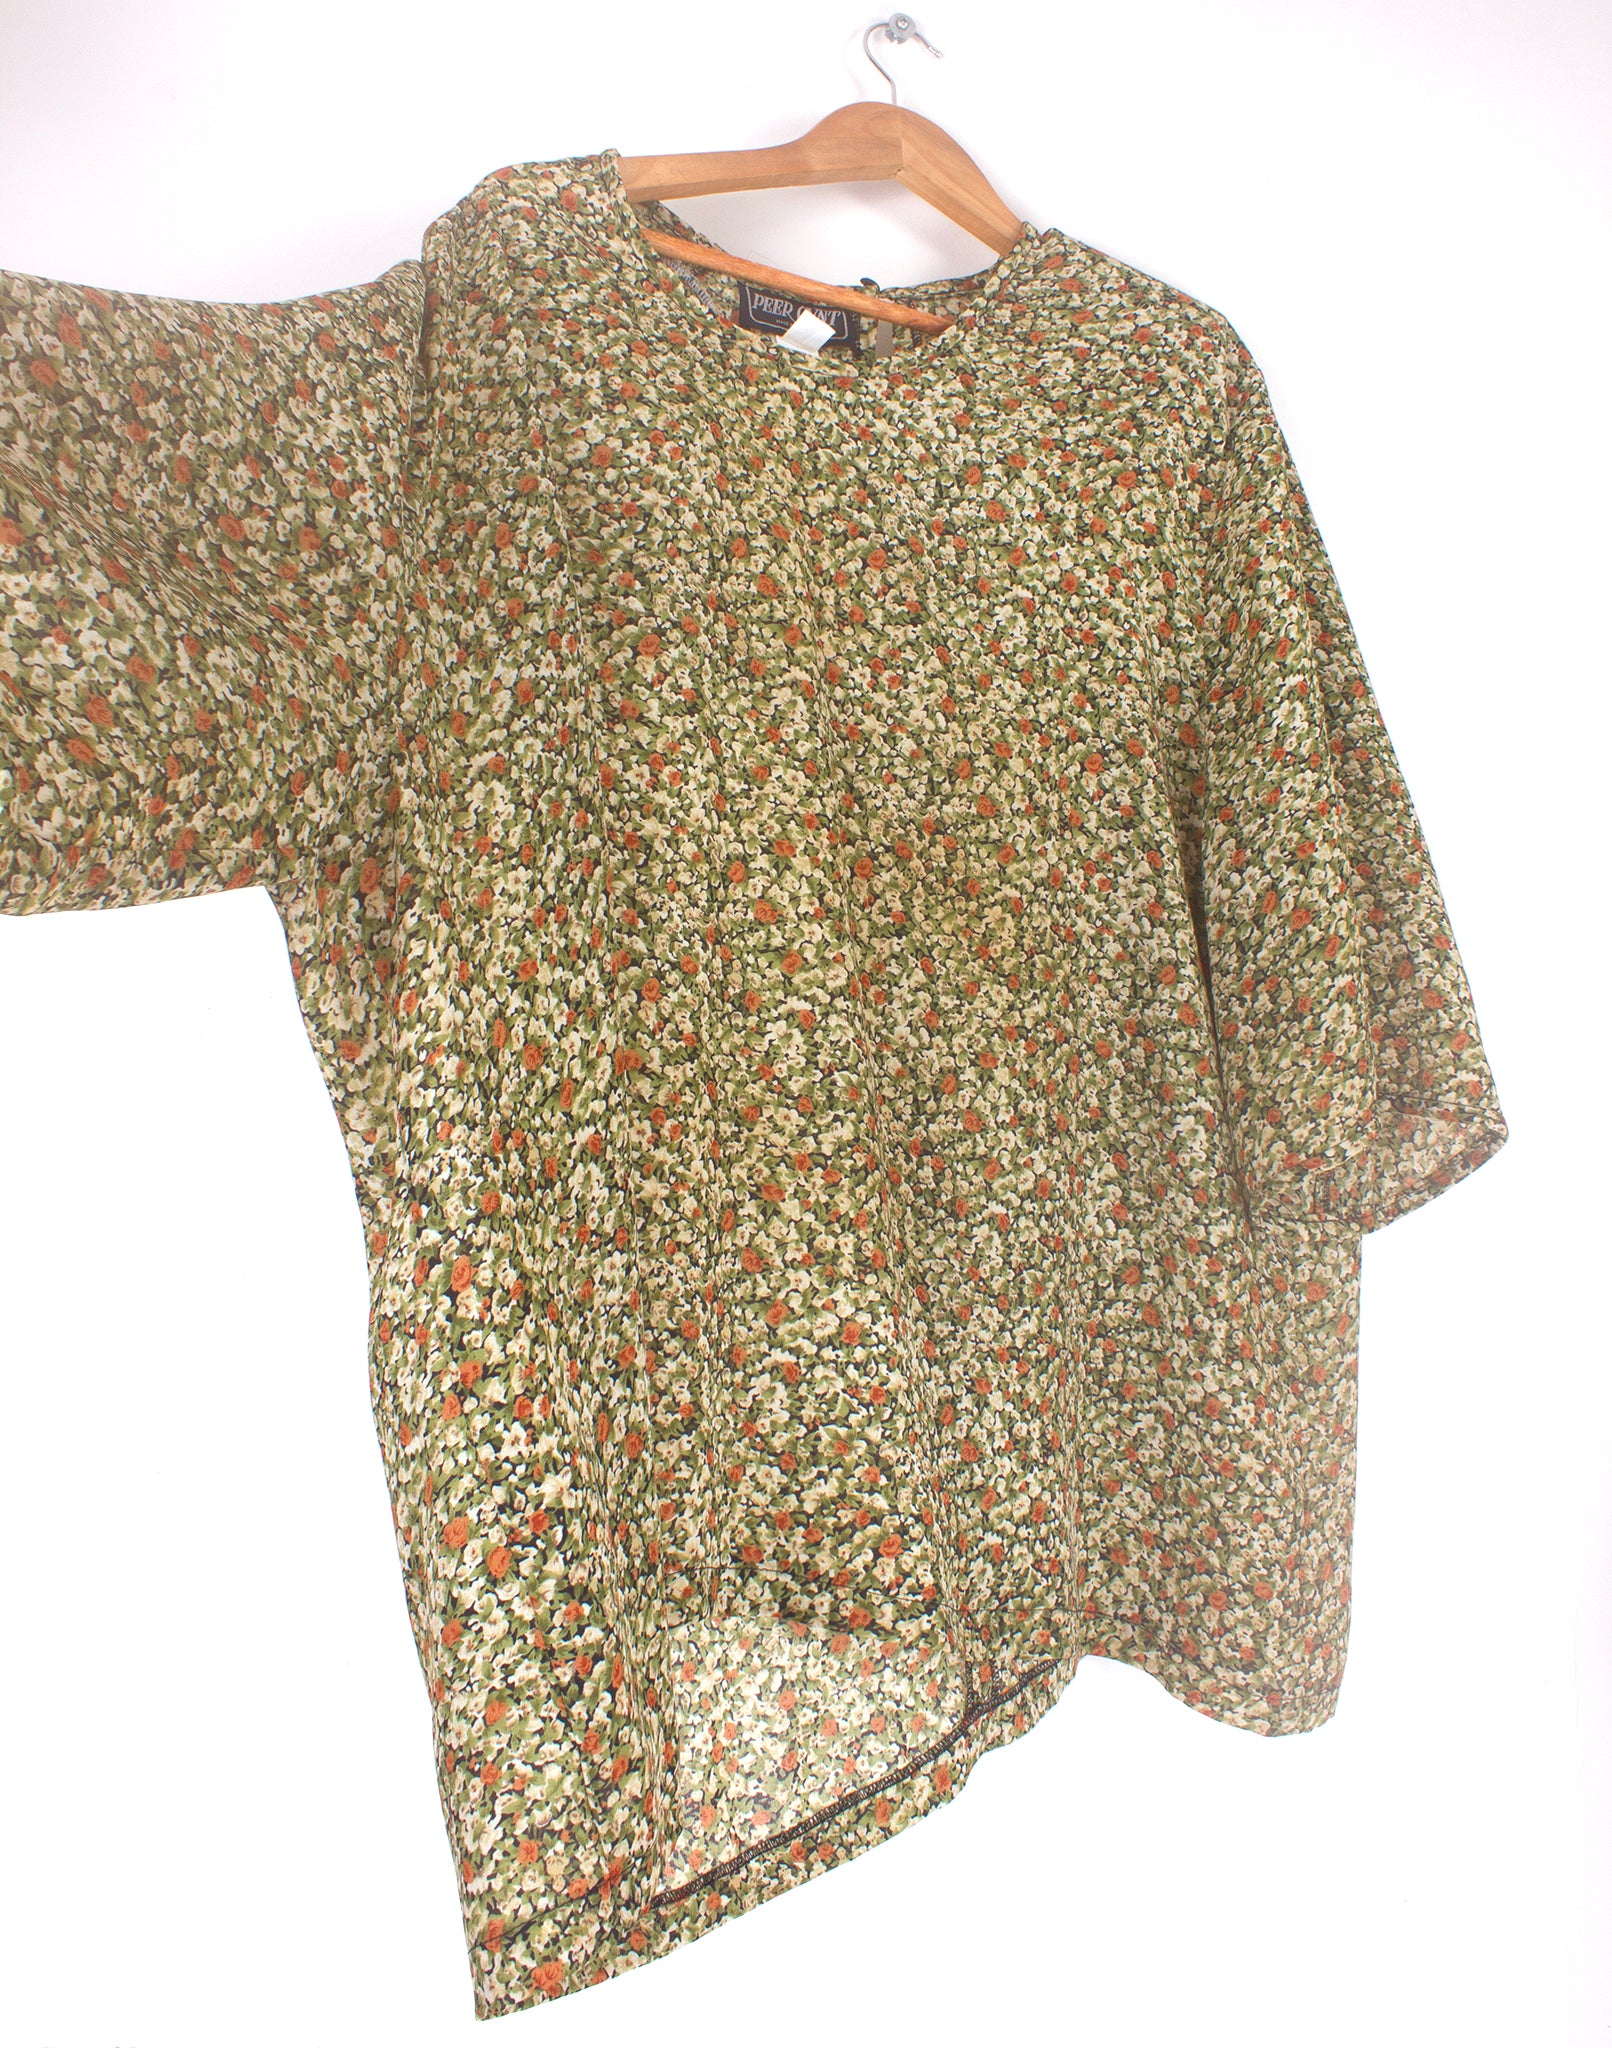 Vintage 80's Pyr Gynt Brown Green Floral Top - Size XL / XXL